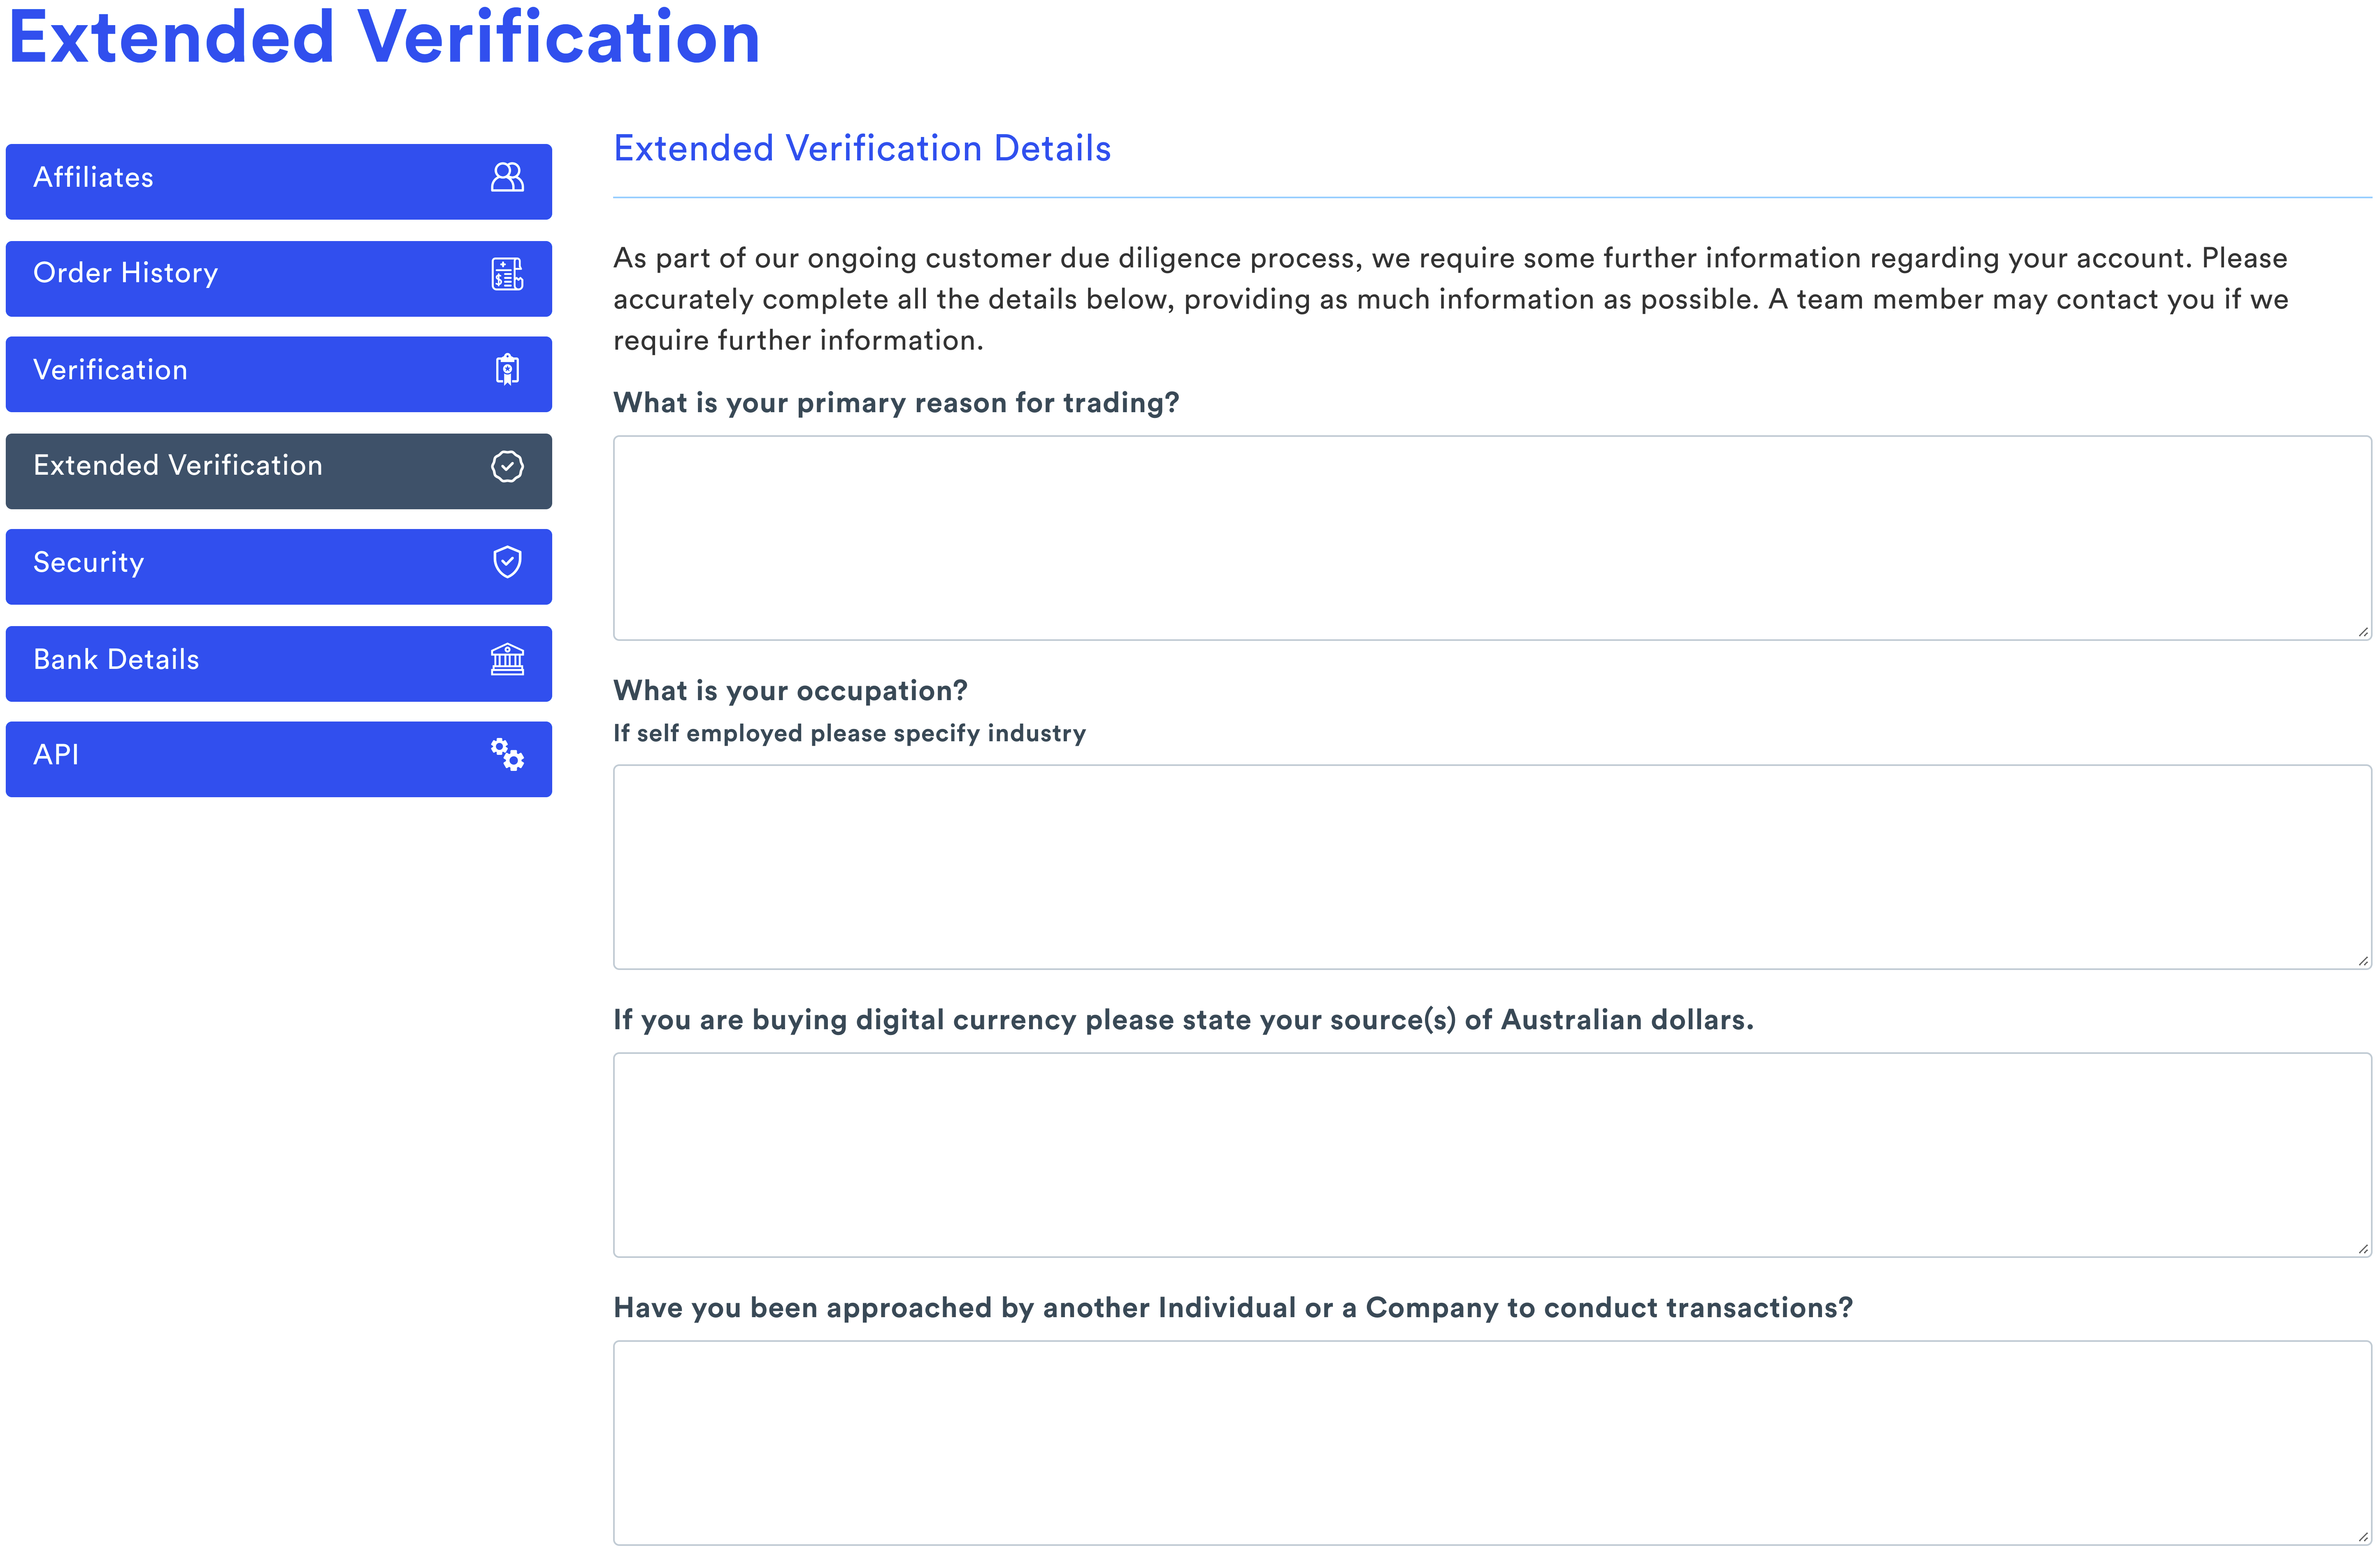 CoinSpot_Extended_Verification_Form.png